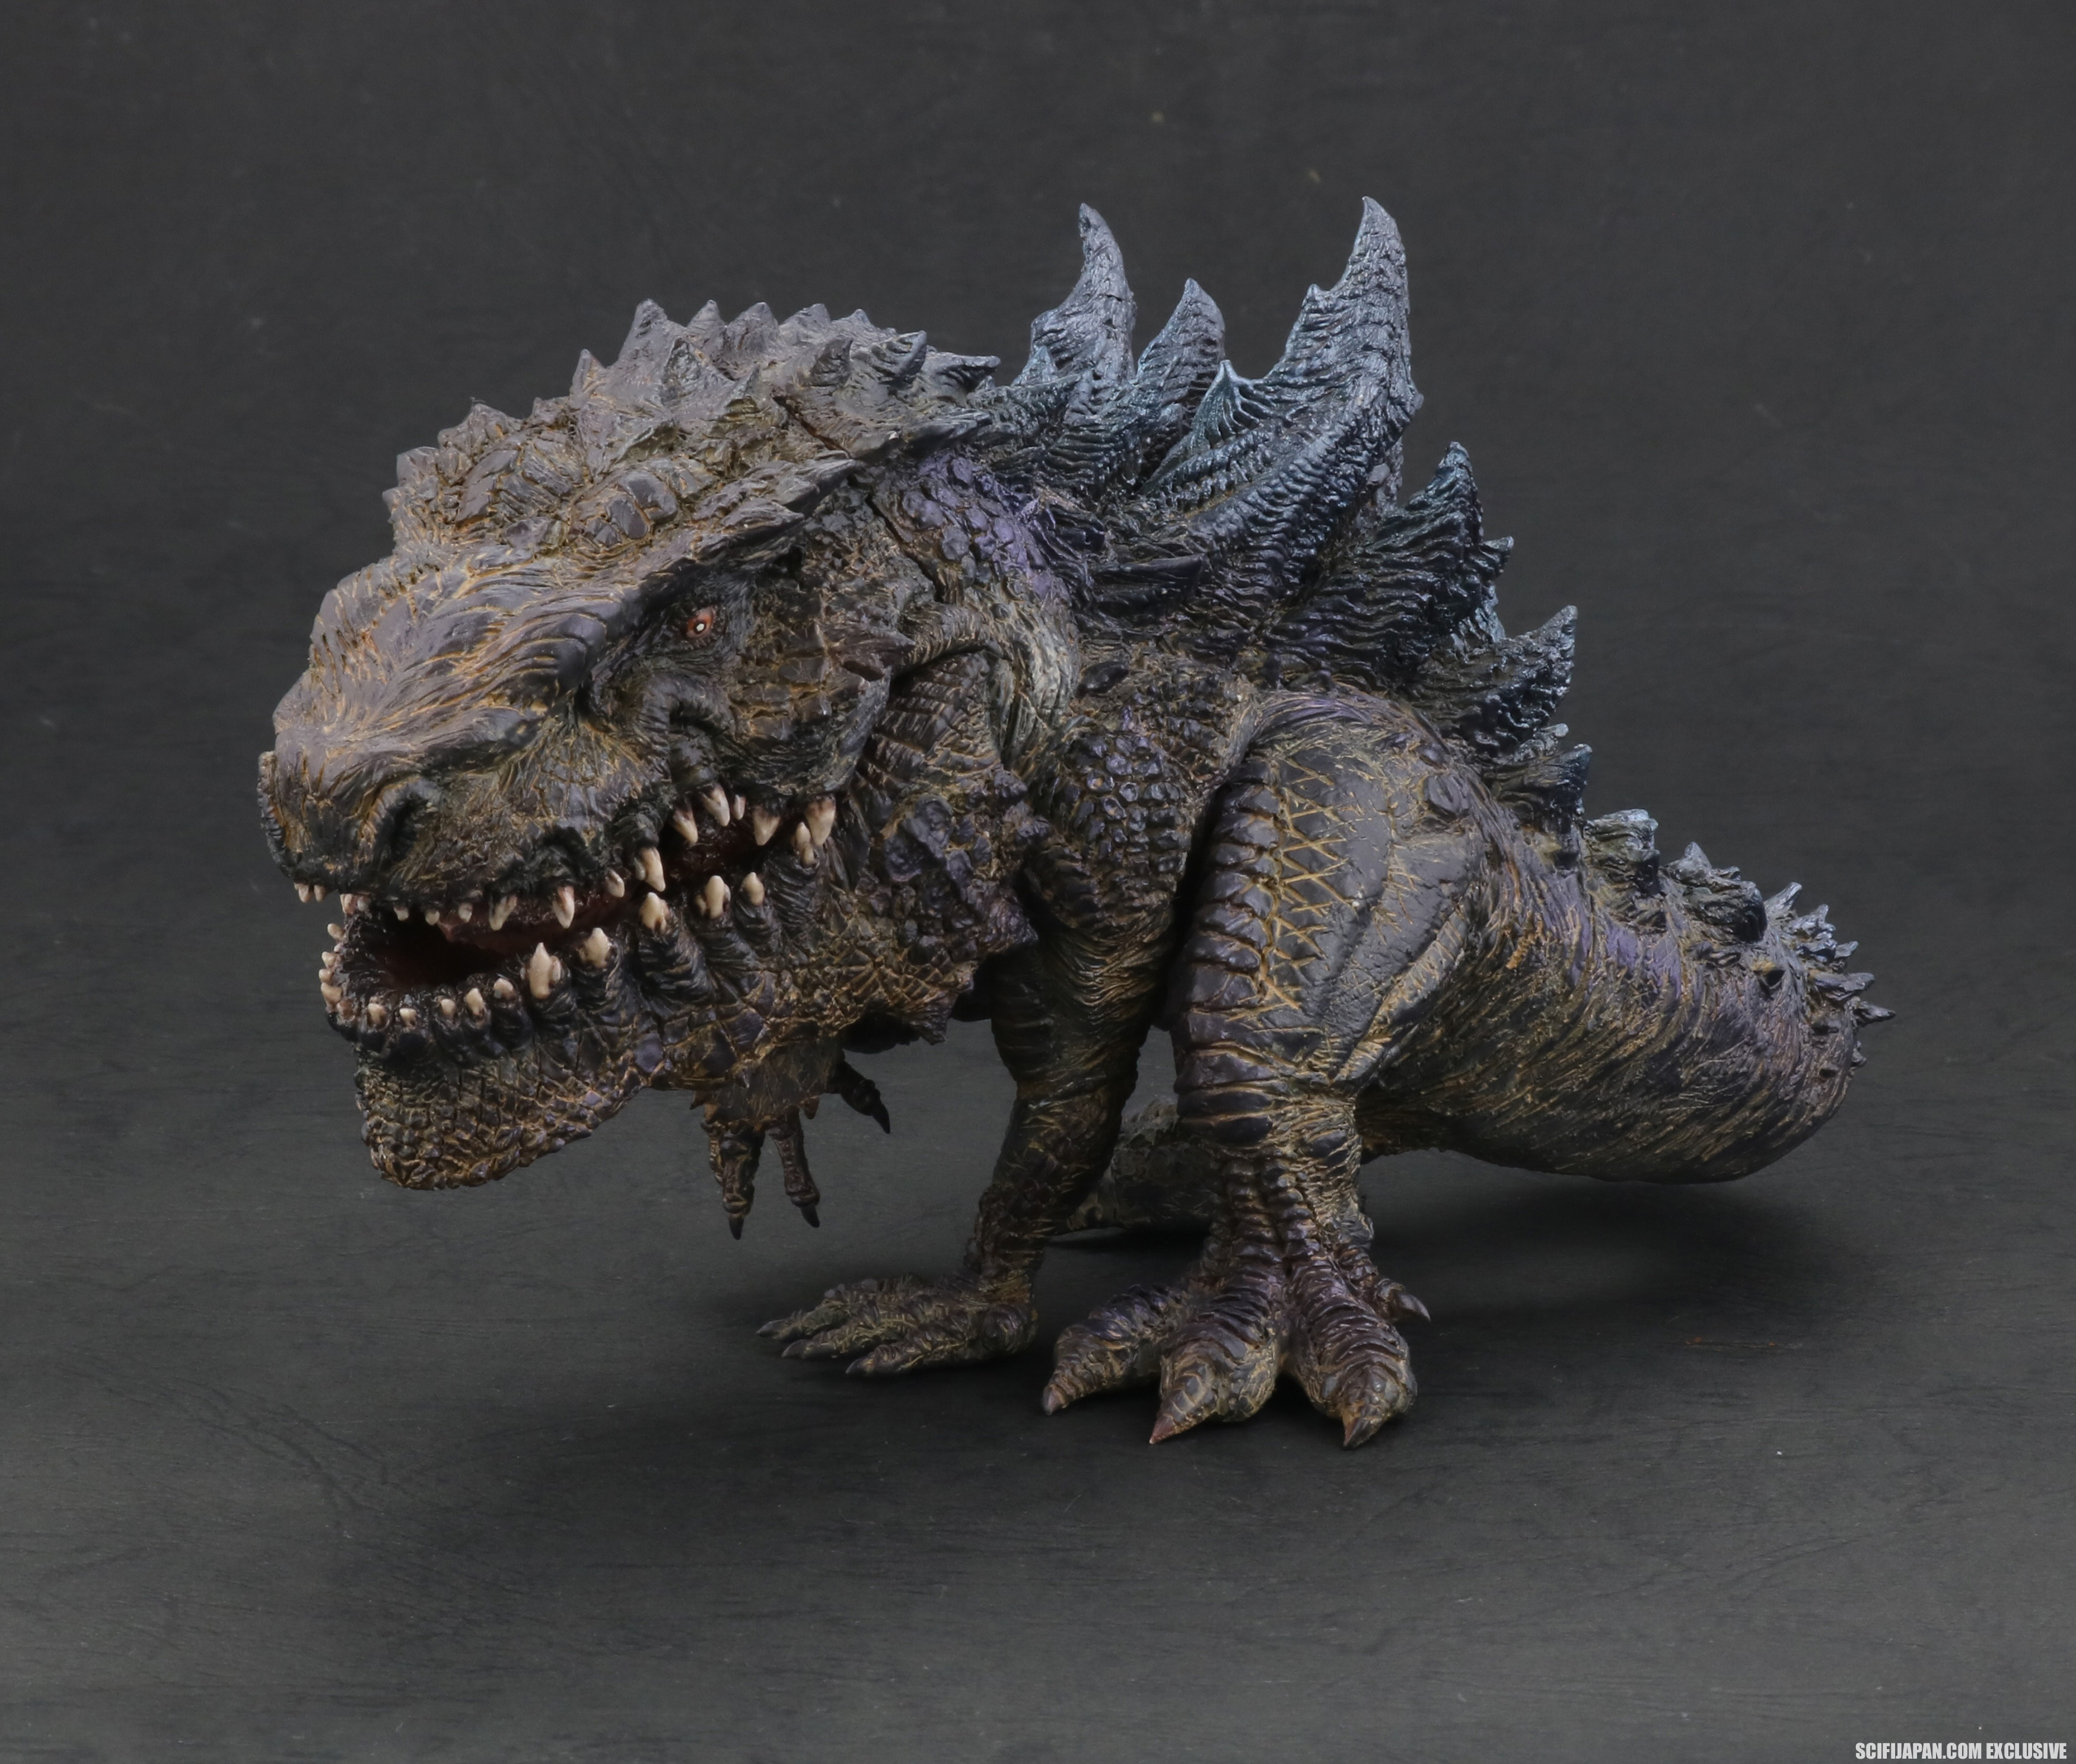 X-PLUS Deforeal Series Godzilla 1998 normal ver Figure From Japan F/S 